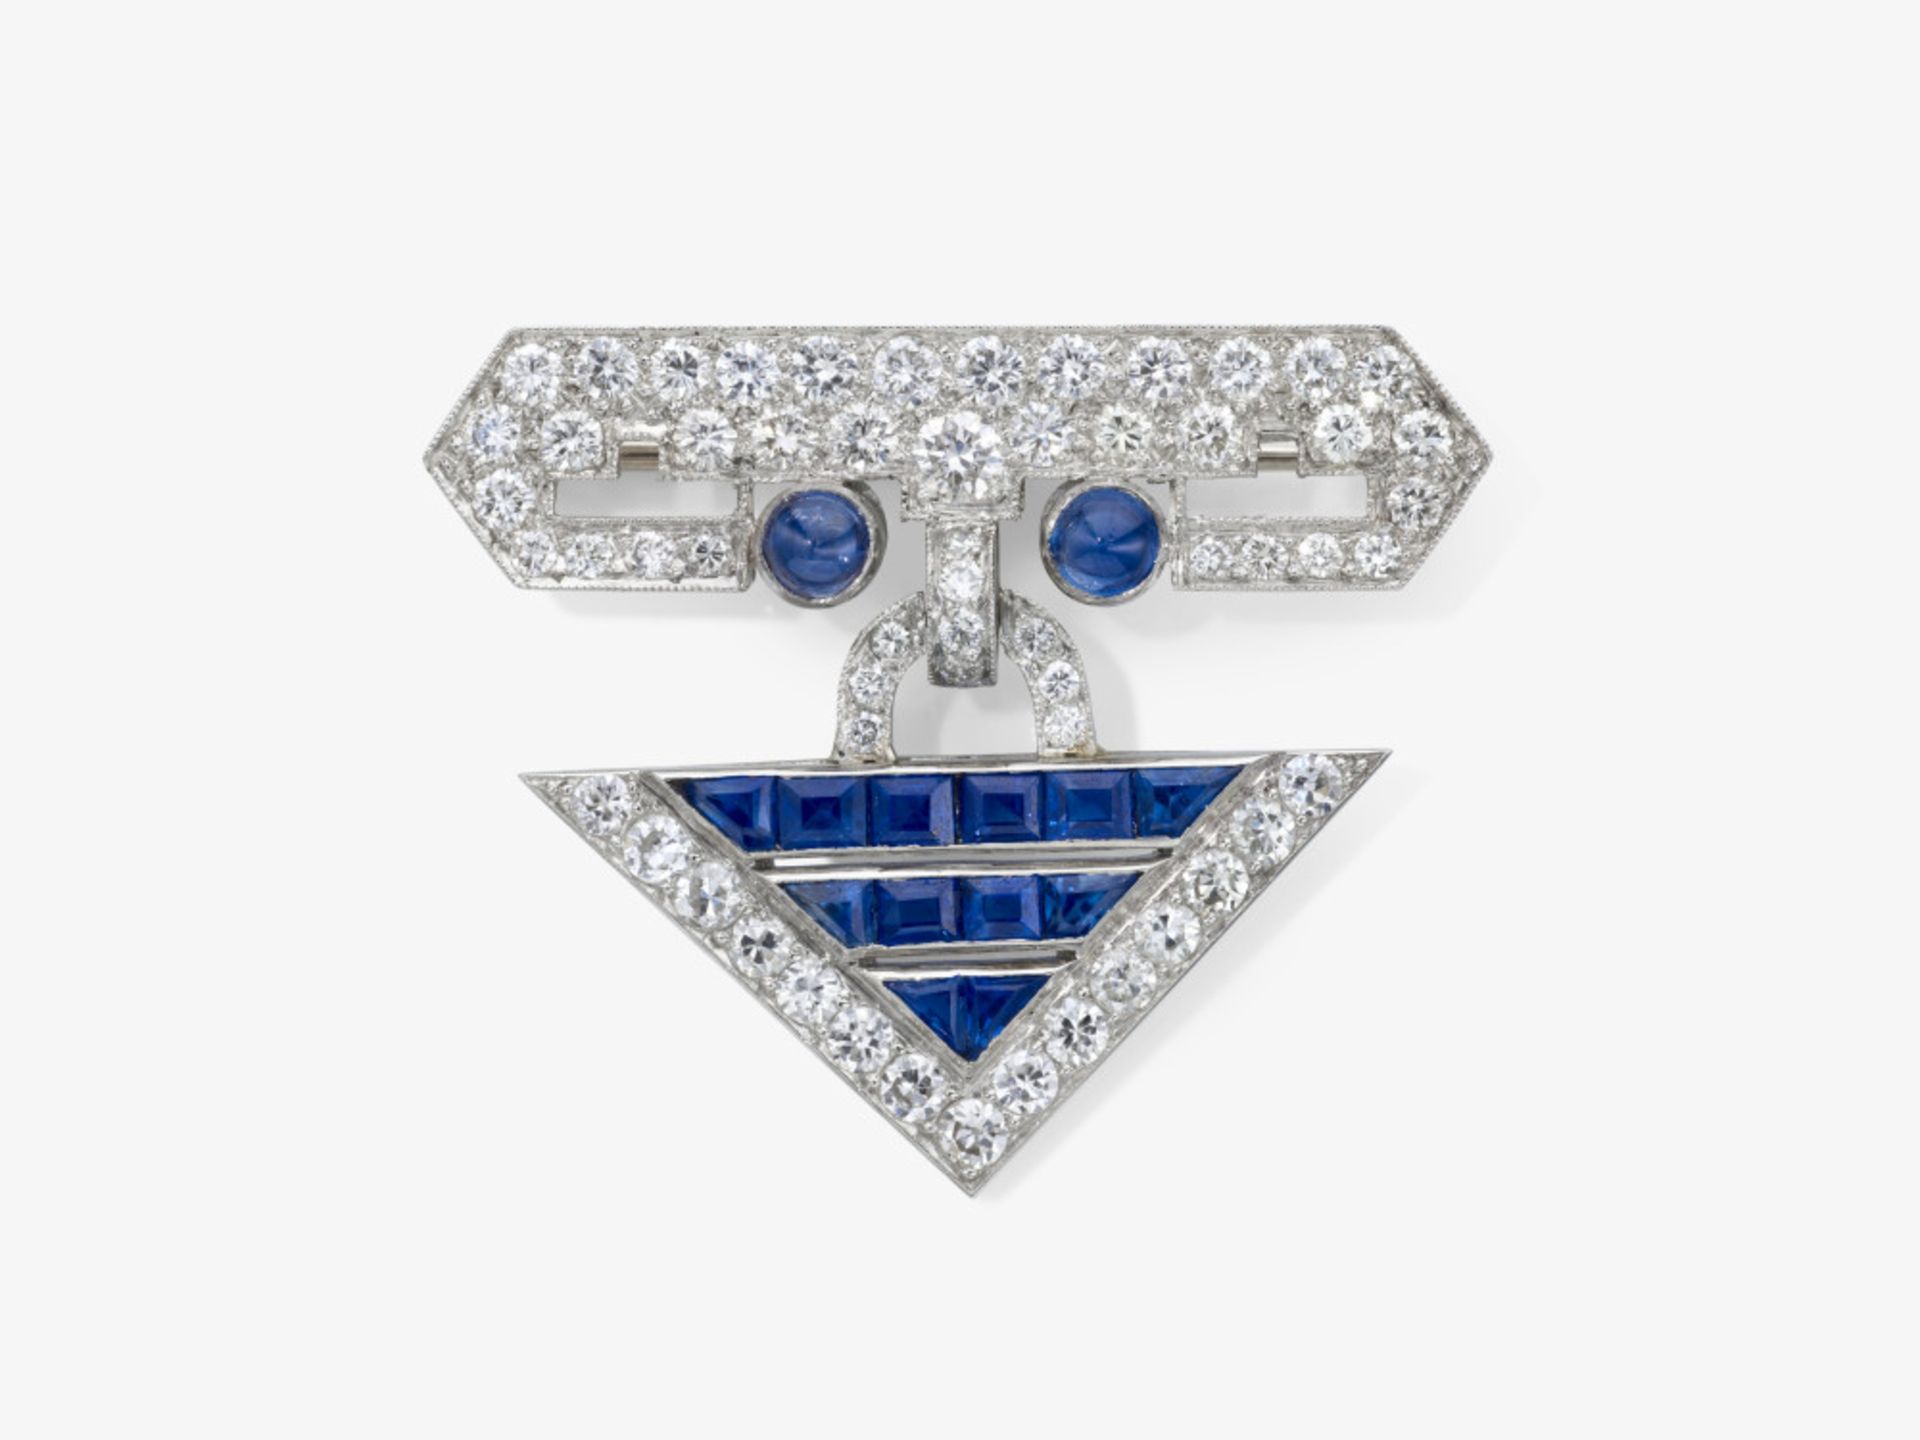 An Art Deco brooch decorated with brilliant-cut diamonds and sapphires - Probably America, 1925